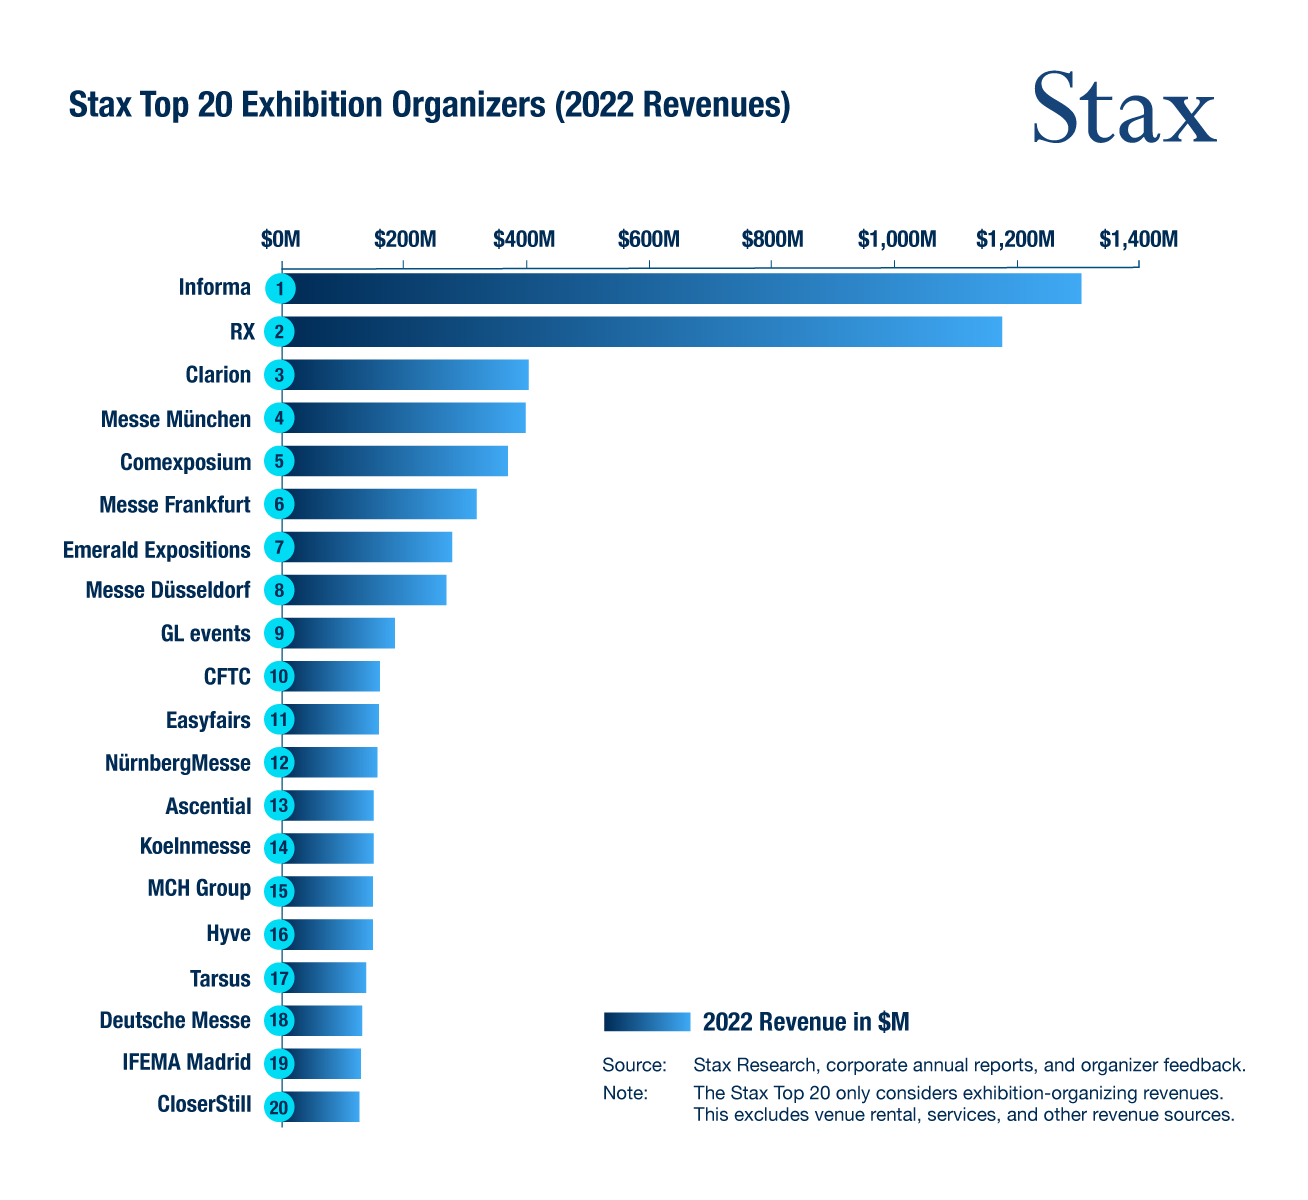 Stax Top 20 Exhibition Organizers by 2022 Revenues